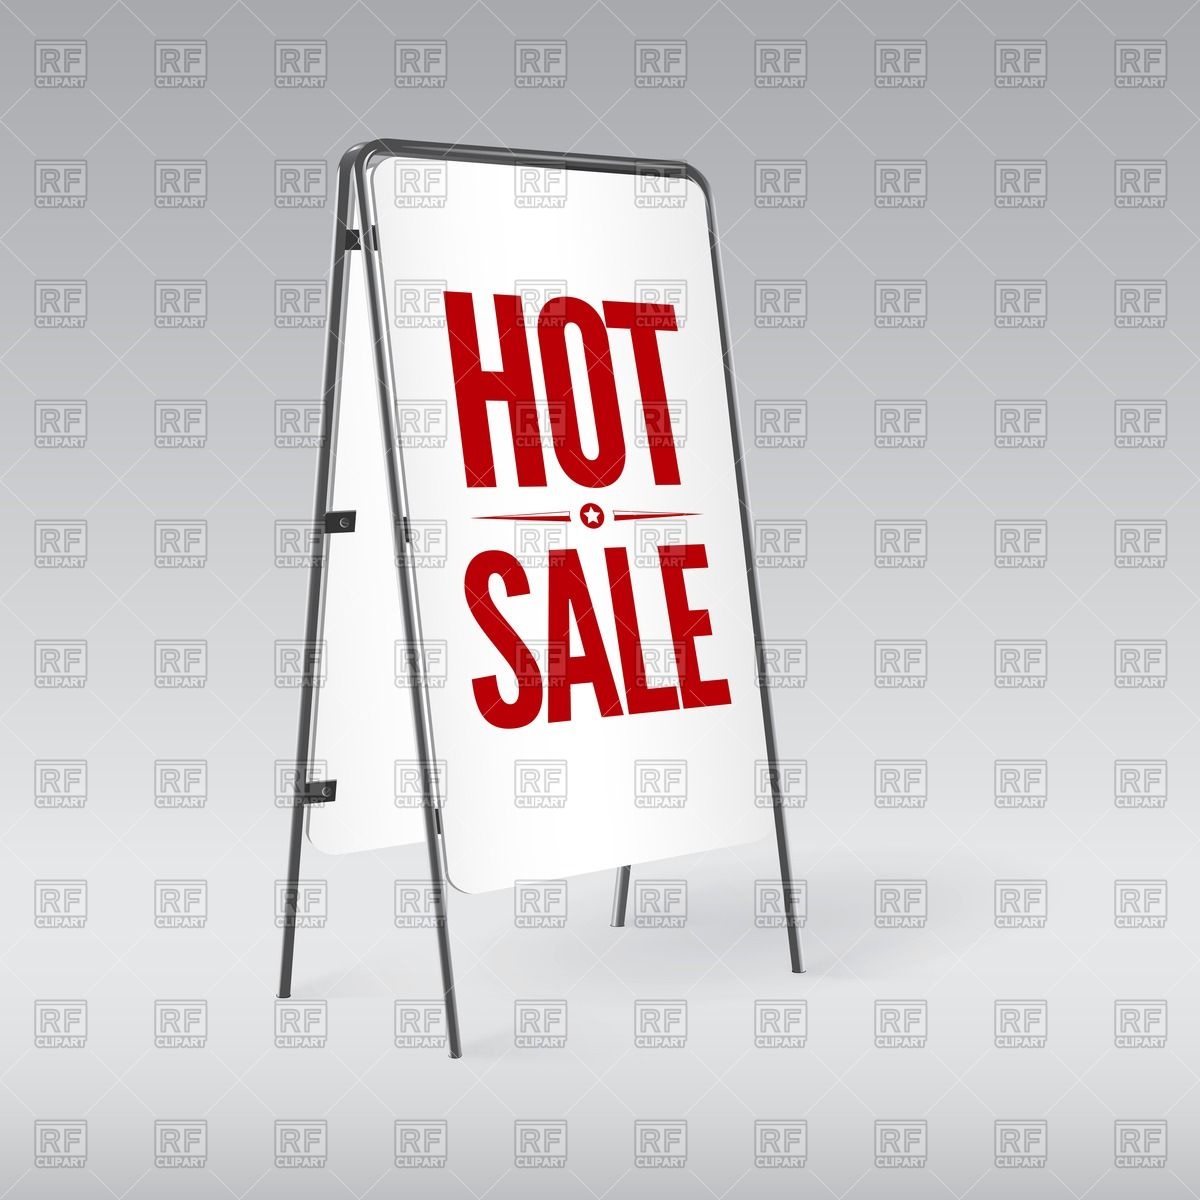 Hot Sale Objects Download Royalty Free Vector Clip Art  Eps